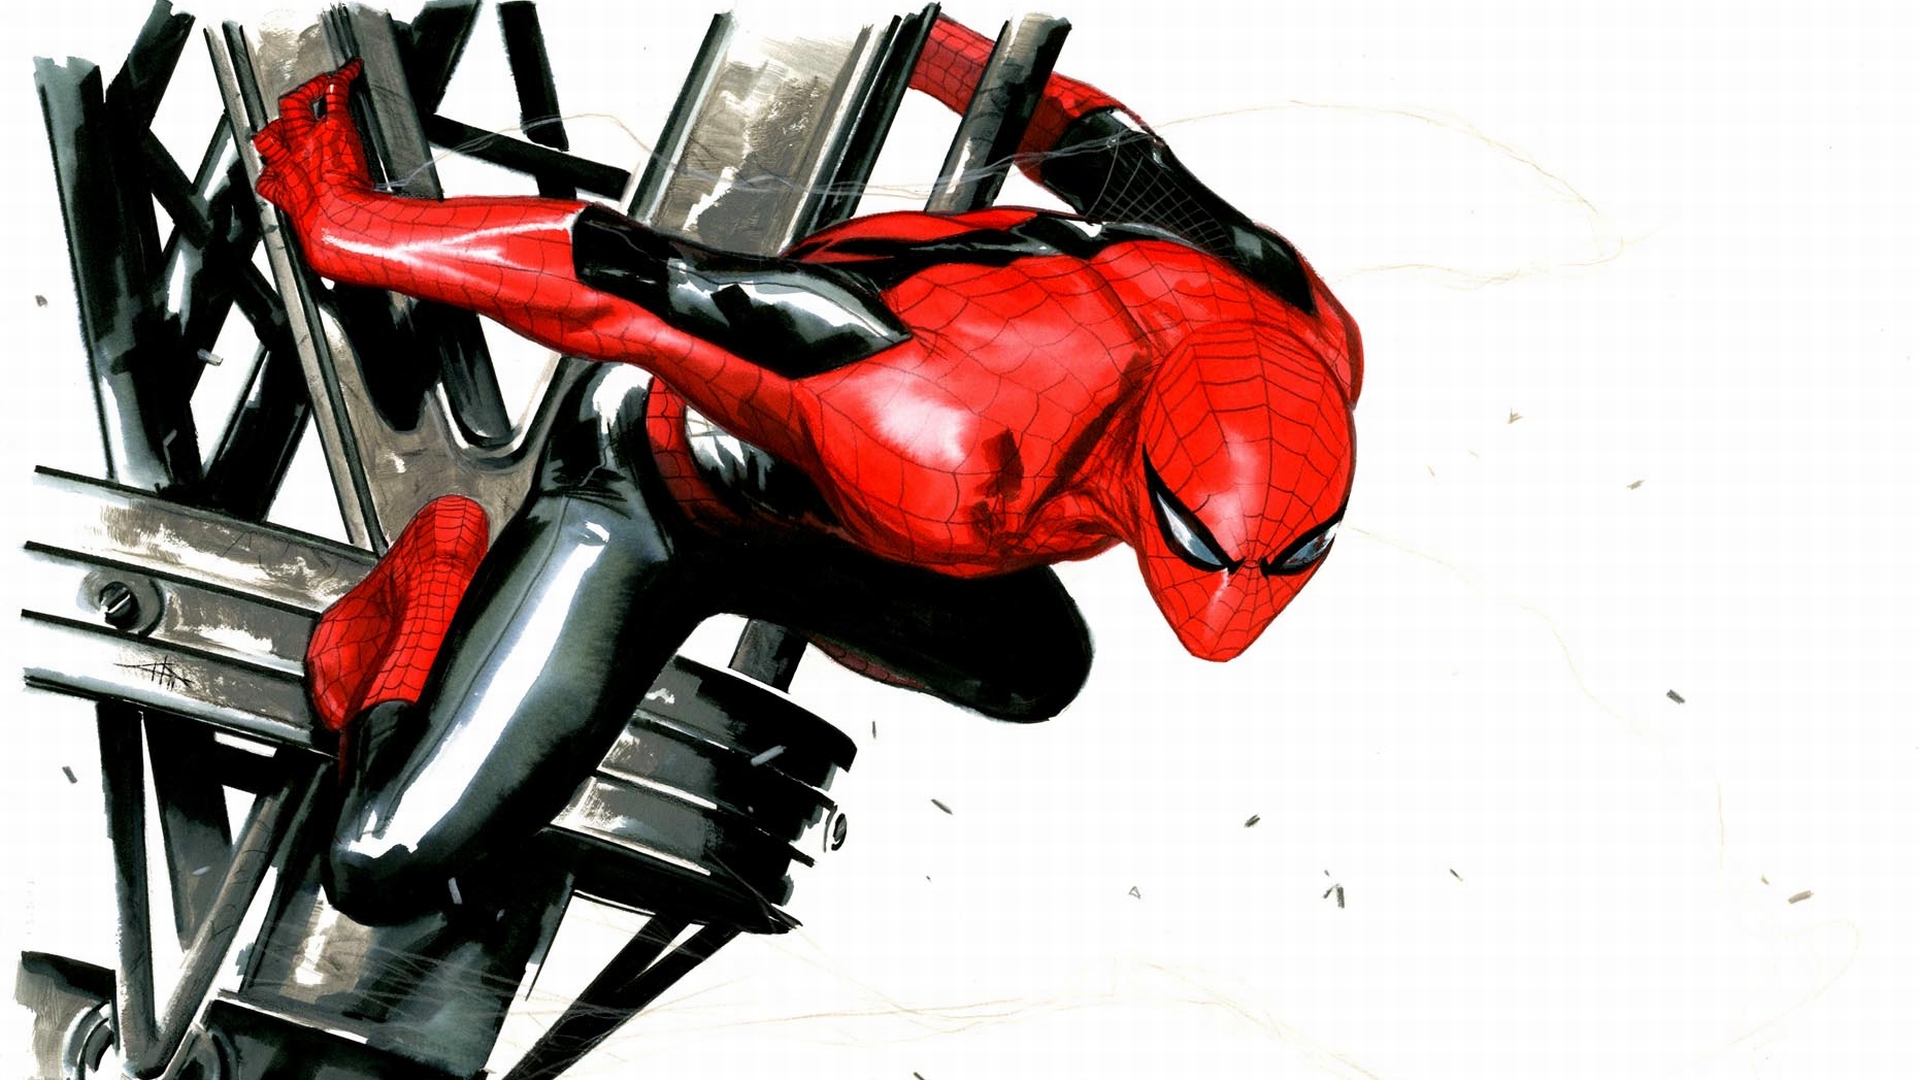 Spider-Man soaring through the city in a comic-inspired desktop wallpaper